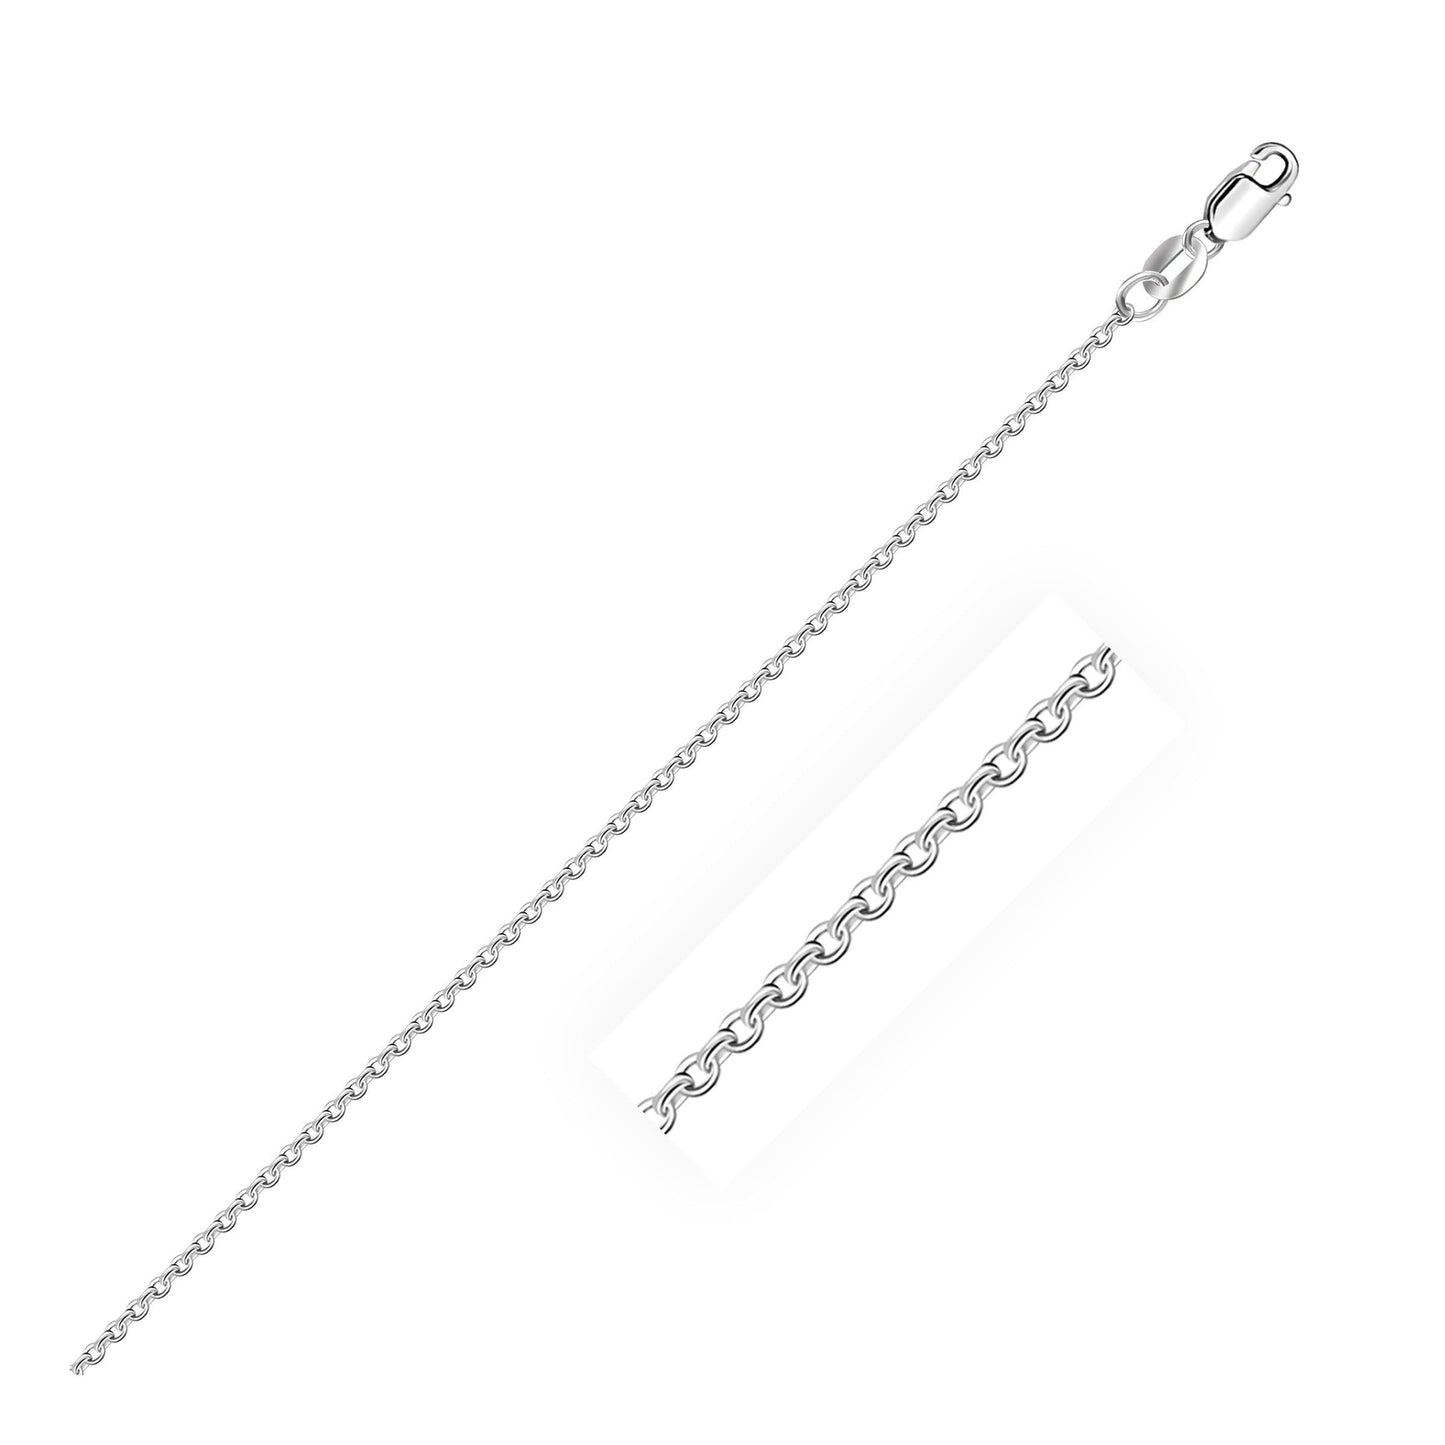 18k White Gold Cable Chain in 1.1 mm